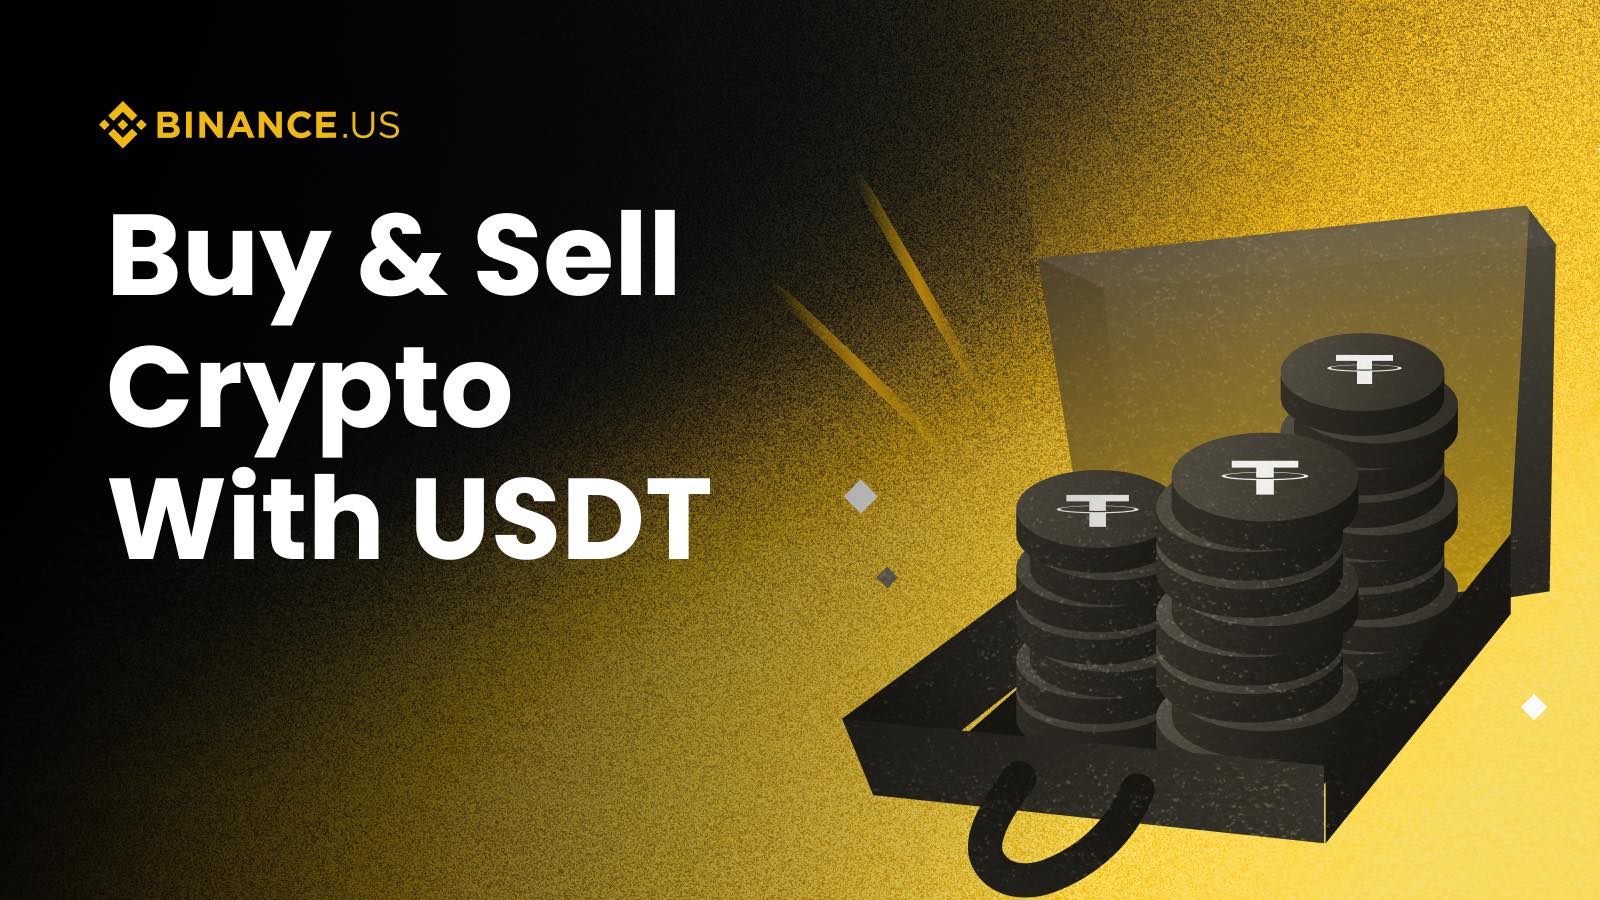 Introducing Buy & Sell Crypto With USDT